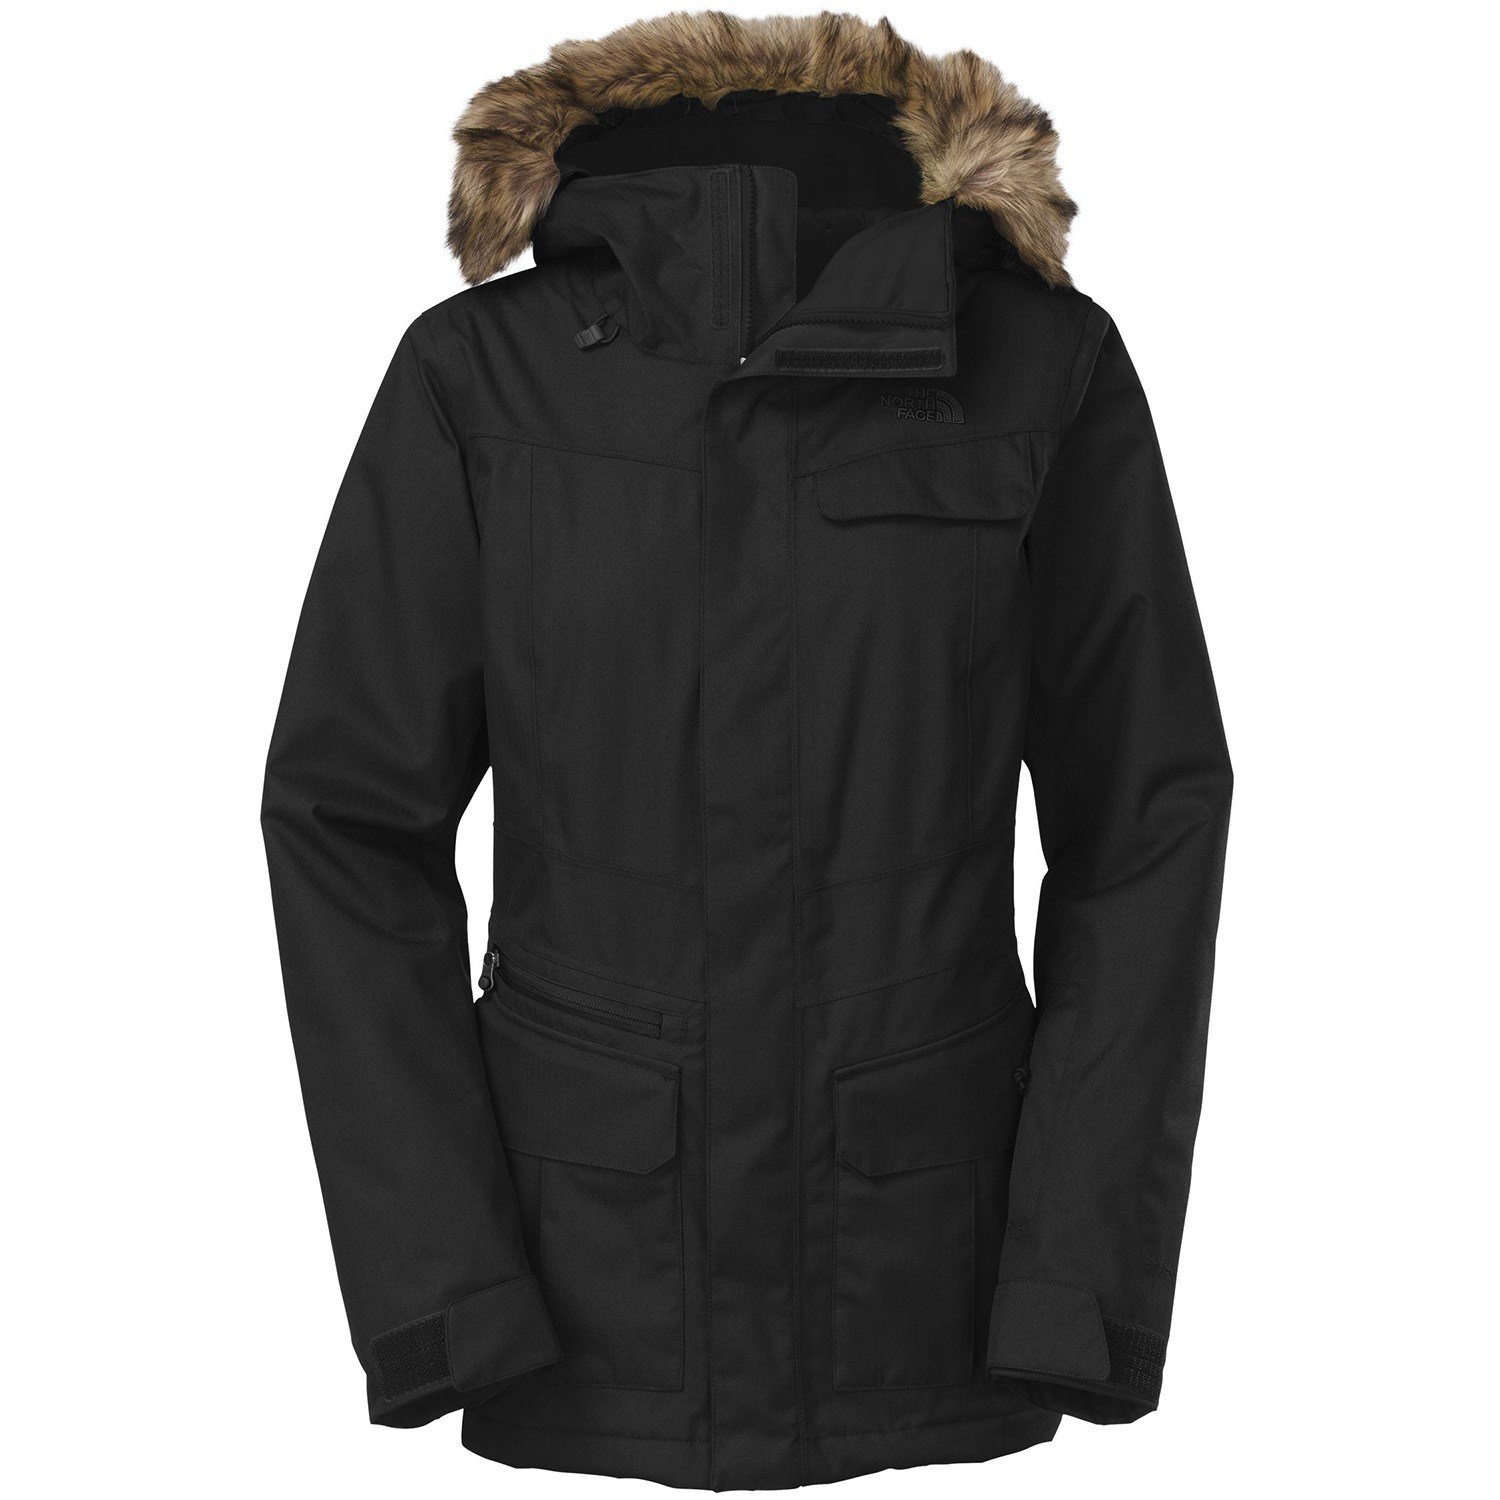 north face women's jacket with fur hood